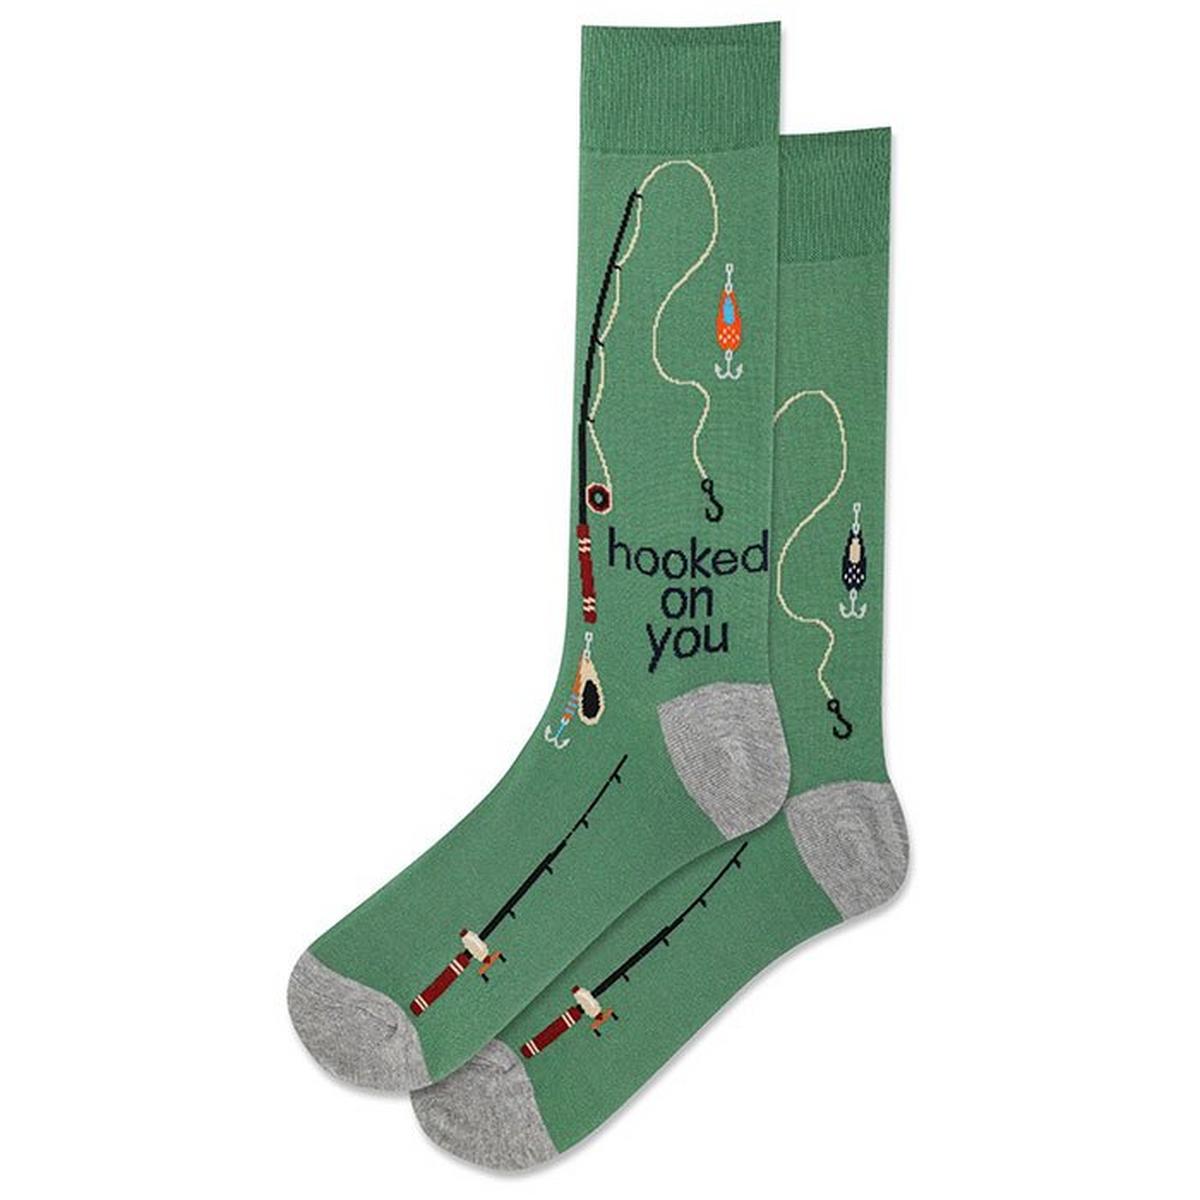 Men's Hooked On You Crew Sock